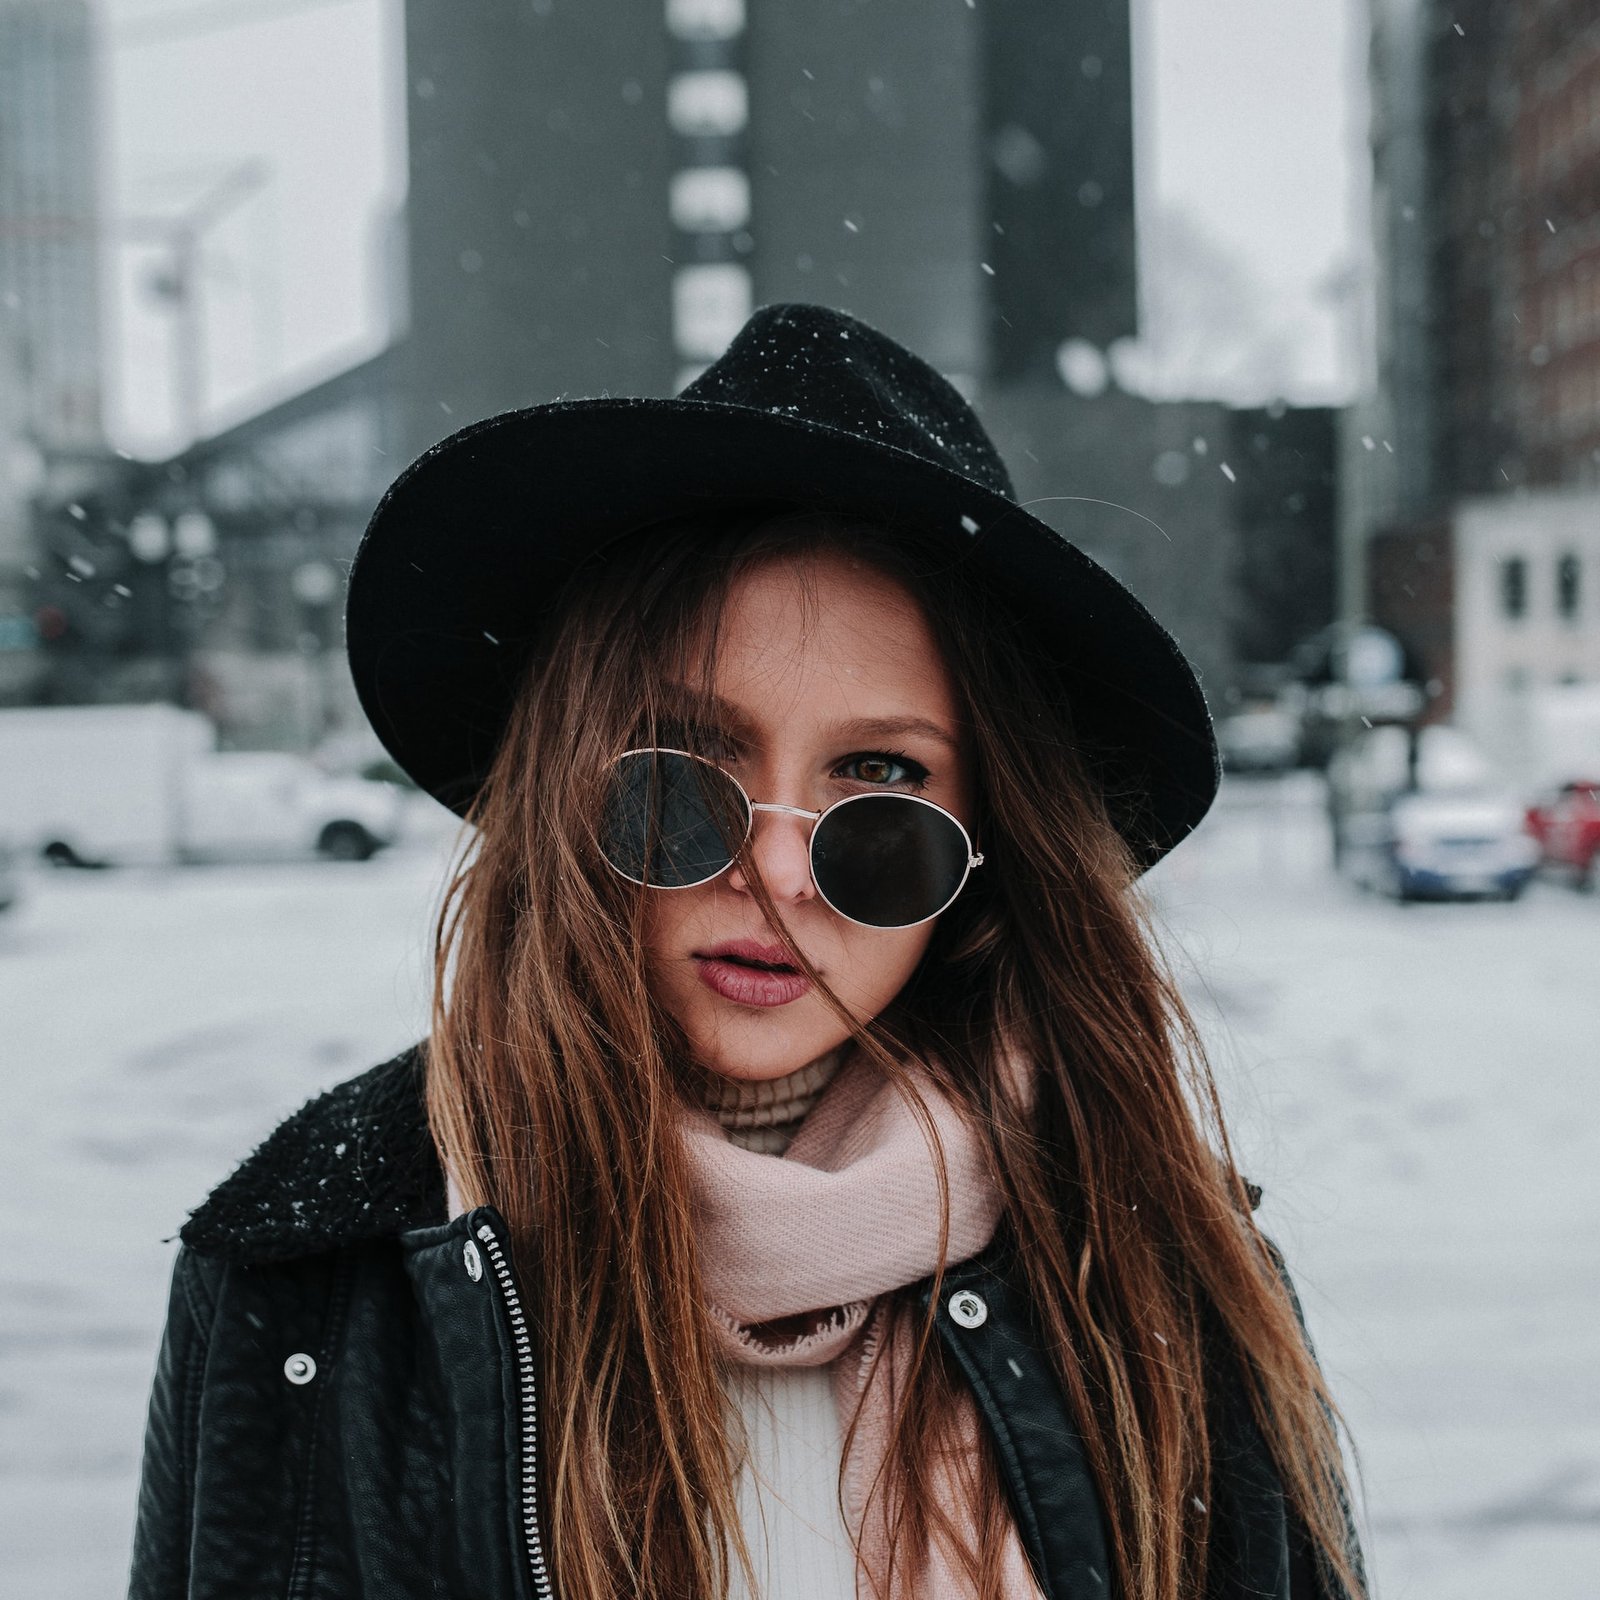 Learn about fashionable accessories that are must-have for winter 2022/2023!